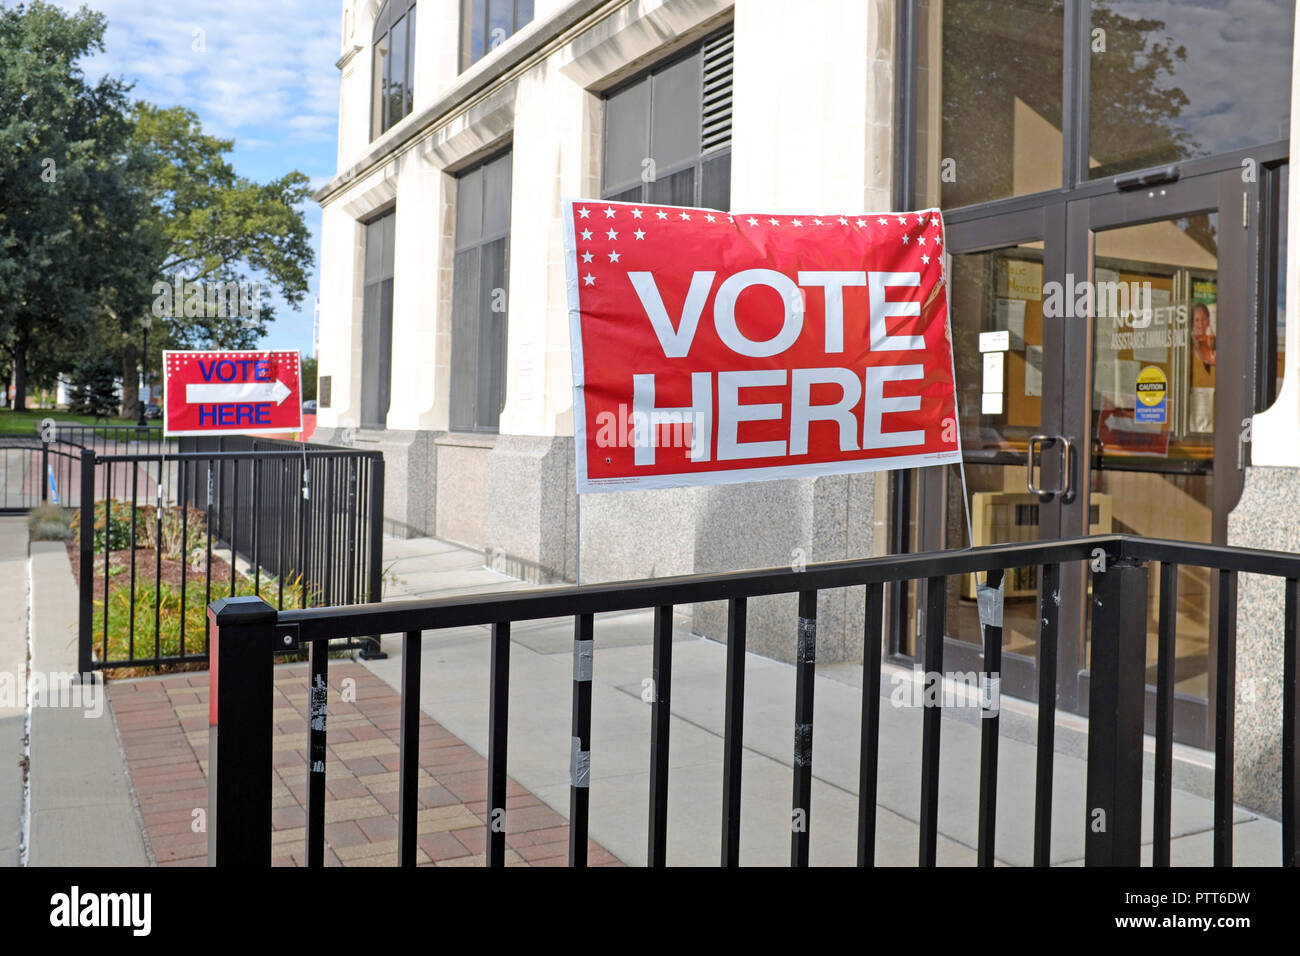 Painesville, Ohio, USA, 10th Oct, 2018.  'Vote Here' signs are displayed outside the Lake County Board of Elections in downtown Painesville, Ohio, USA.  October 10th is the first day for early voting in Ohio allowing the casting of ballots up through the 2018 general election day, November 6.  Early voting in Lake County, Ohio, may only occur at the county Board of Elections whereas on election day there are many polling places throughout the county in which people may cast their ballots.   Stock Photo